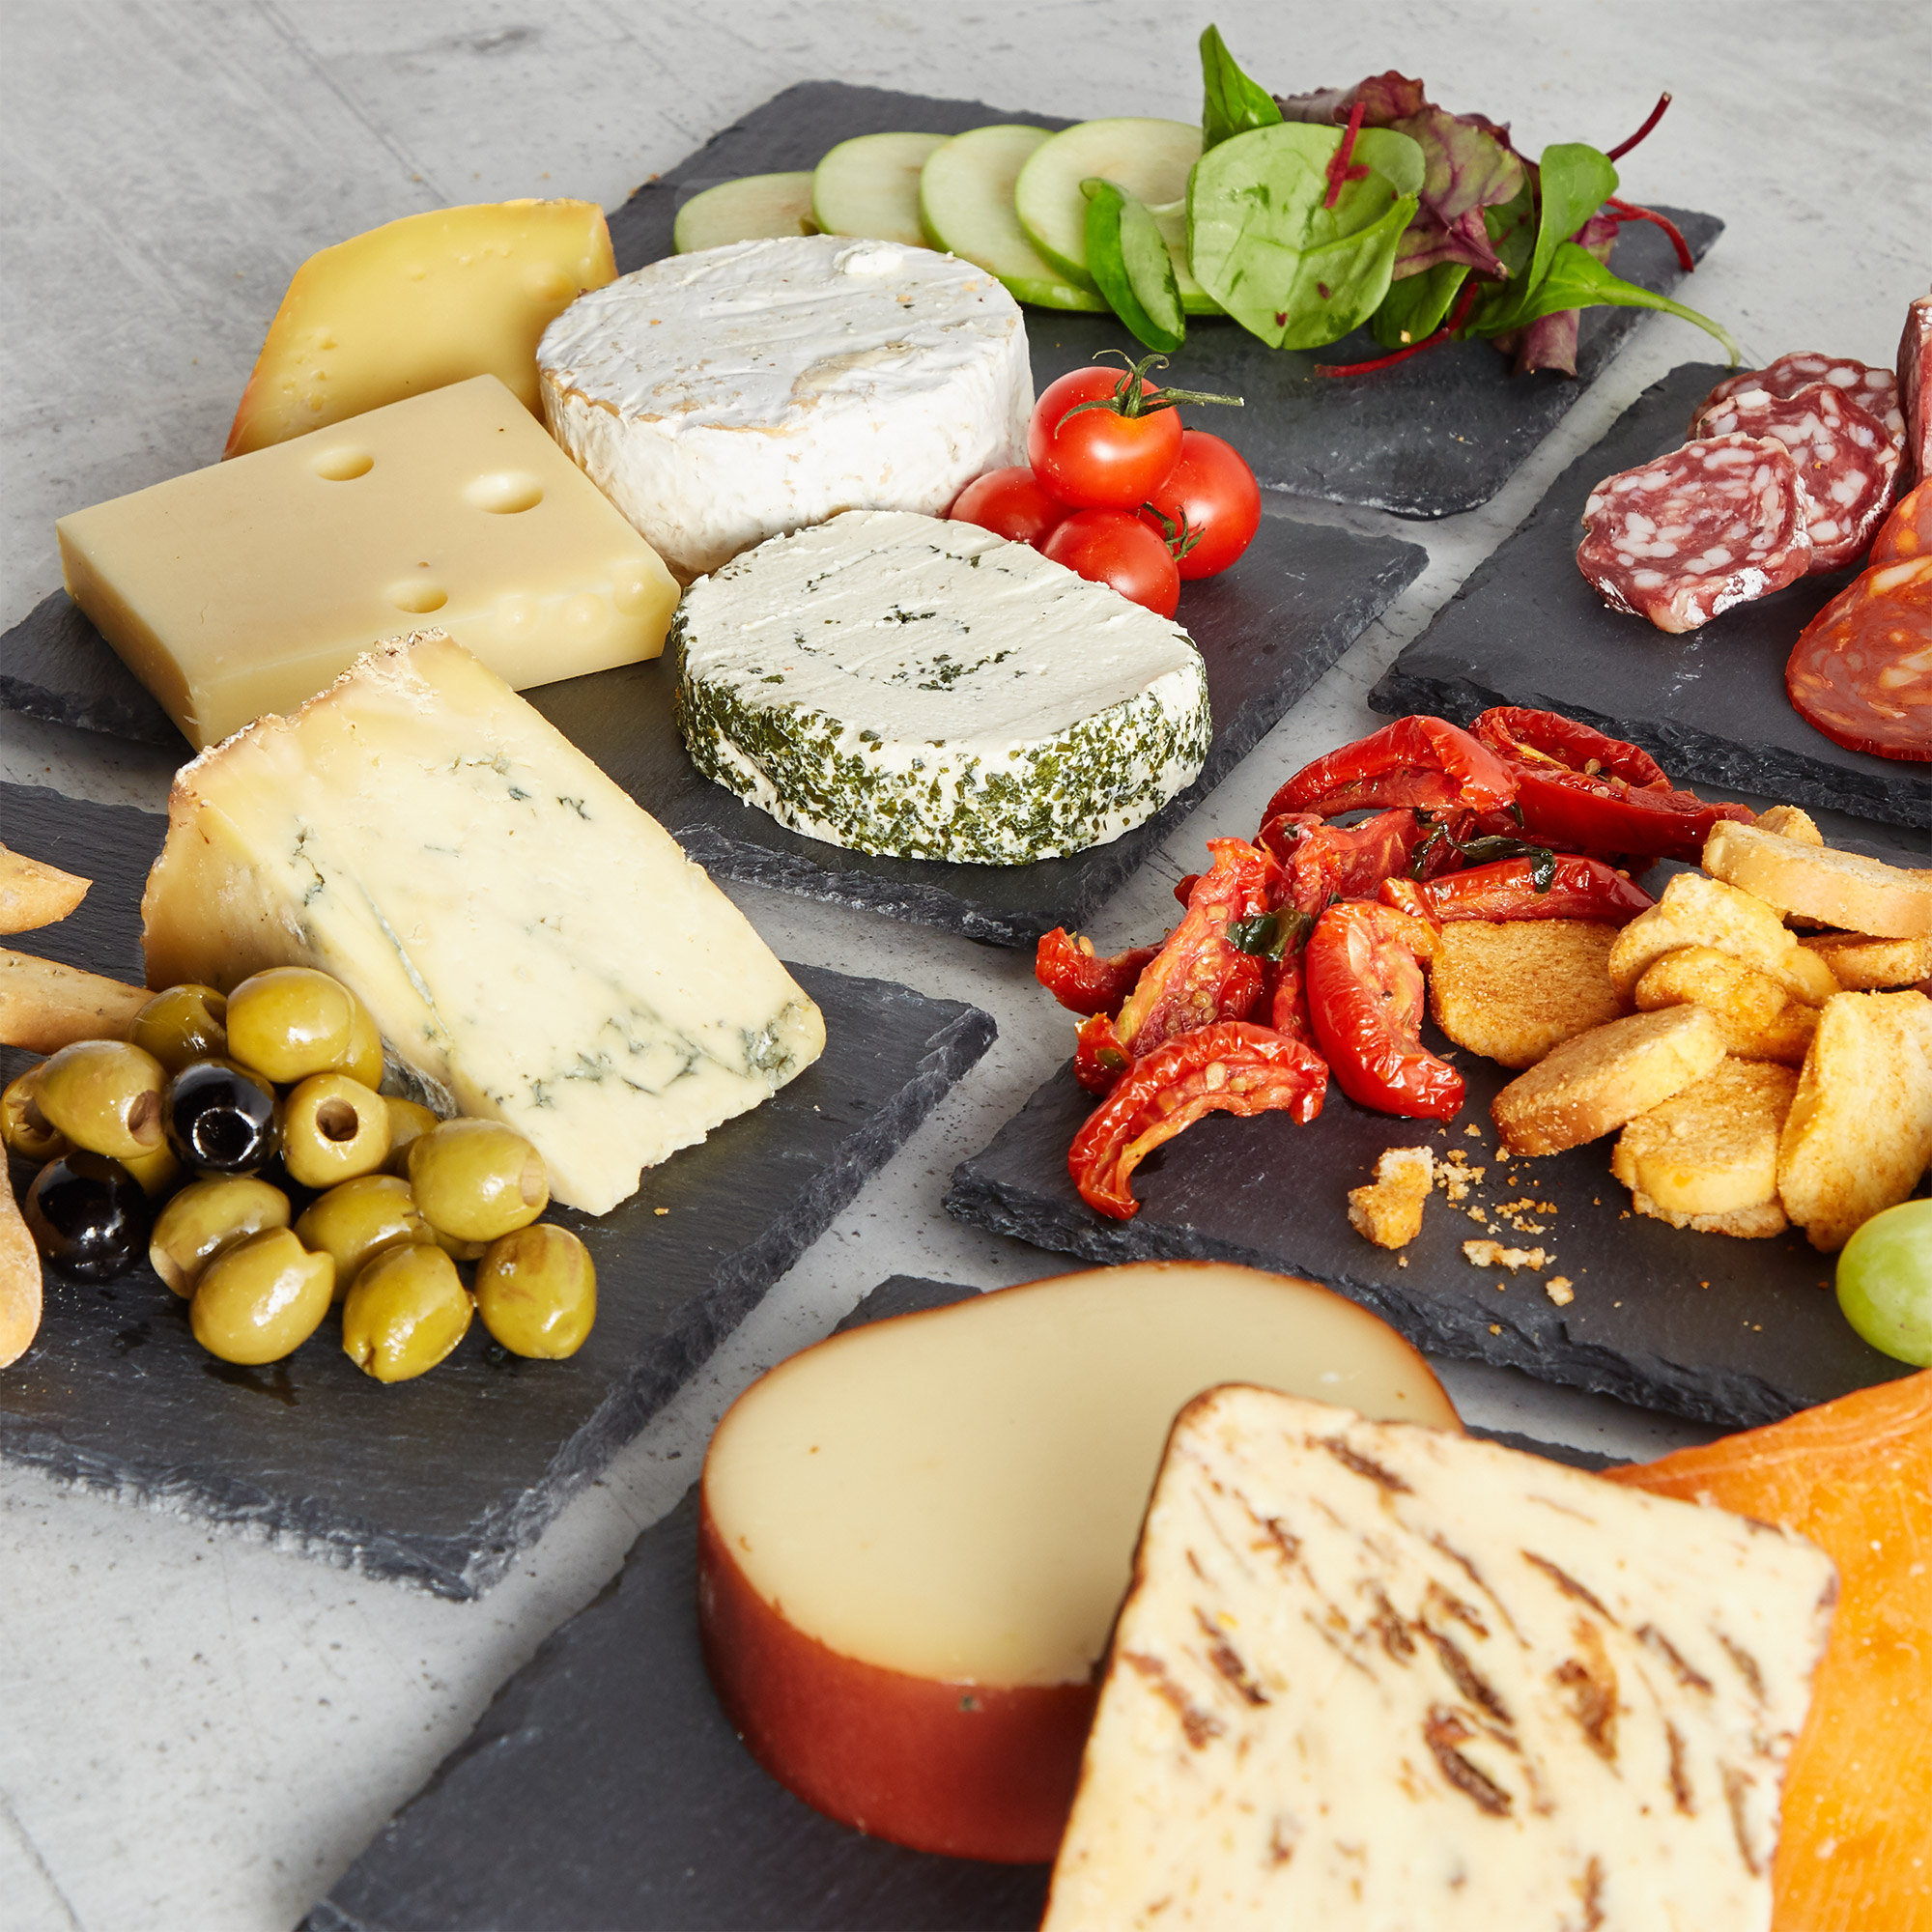 Perfect for Cheese Set of 6 8.7 x 6.3 Cheese Boards/Platters/Plates Desserts Tapas VonShef Slate Serving Tray Set